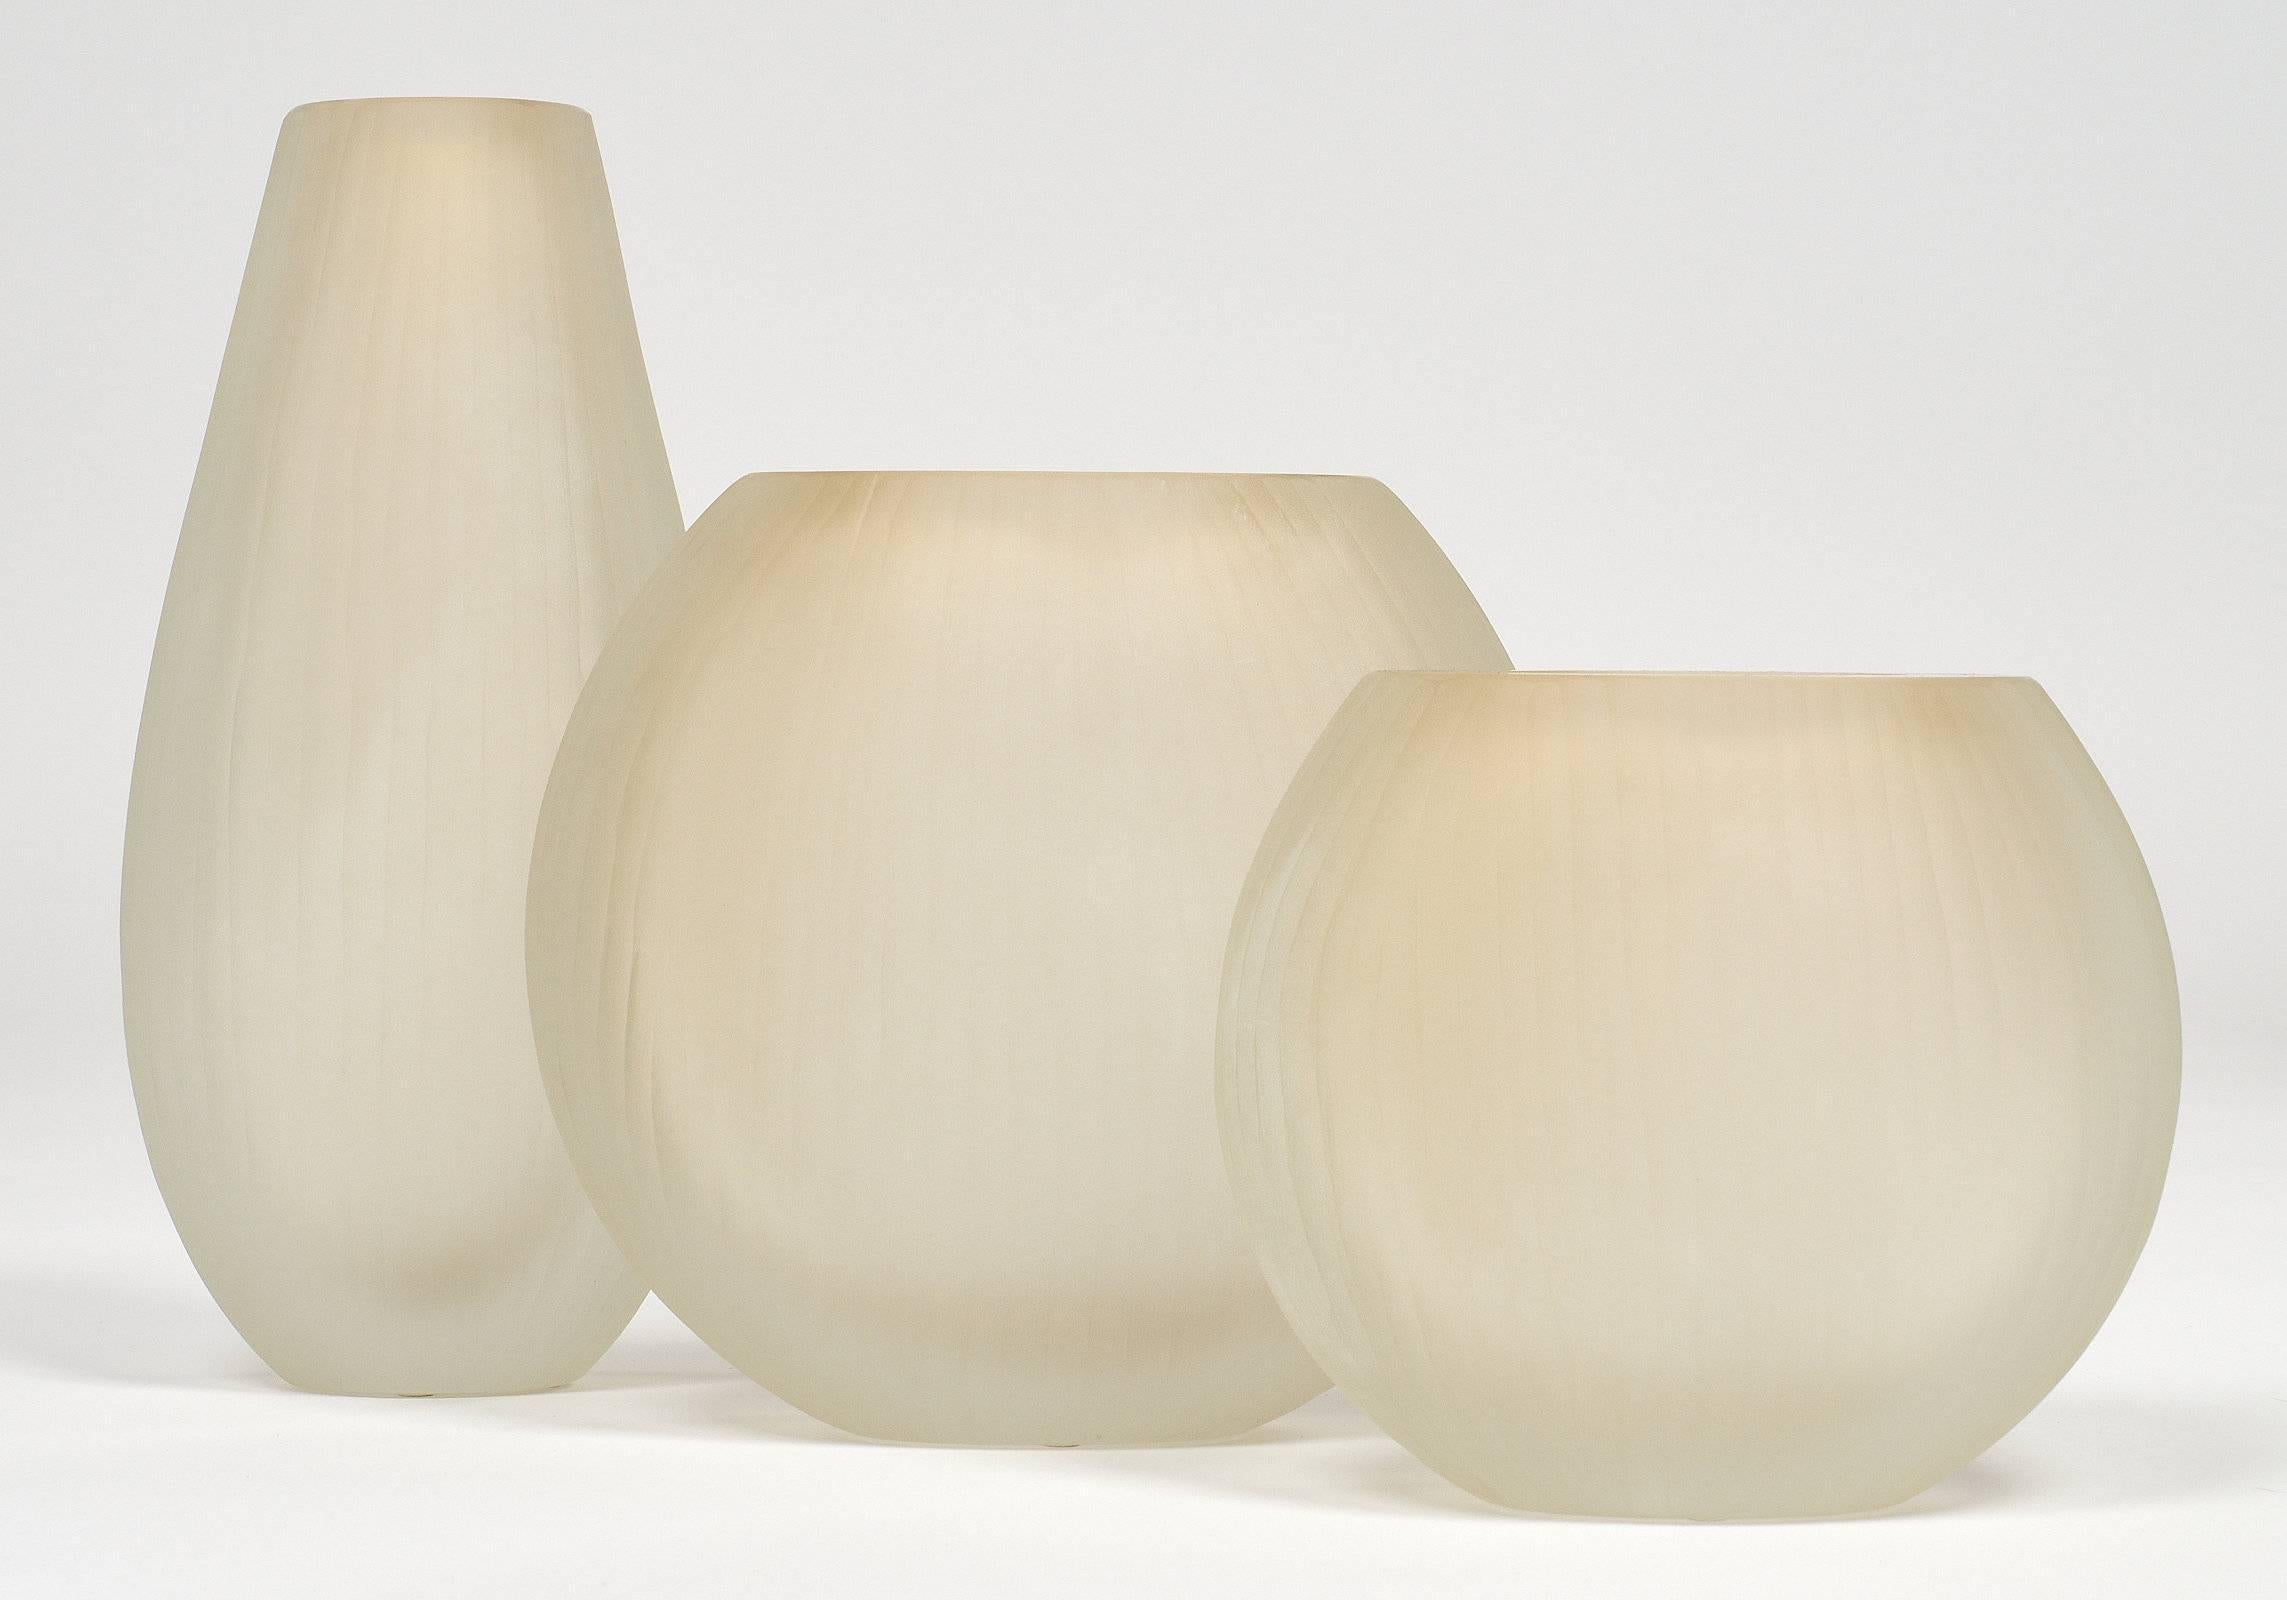 Modern Three Murano Glass Vases in the Tobia Scarpa Style